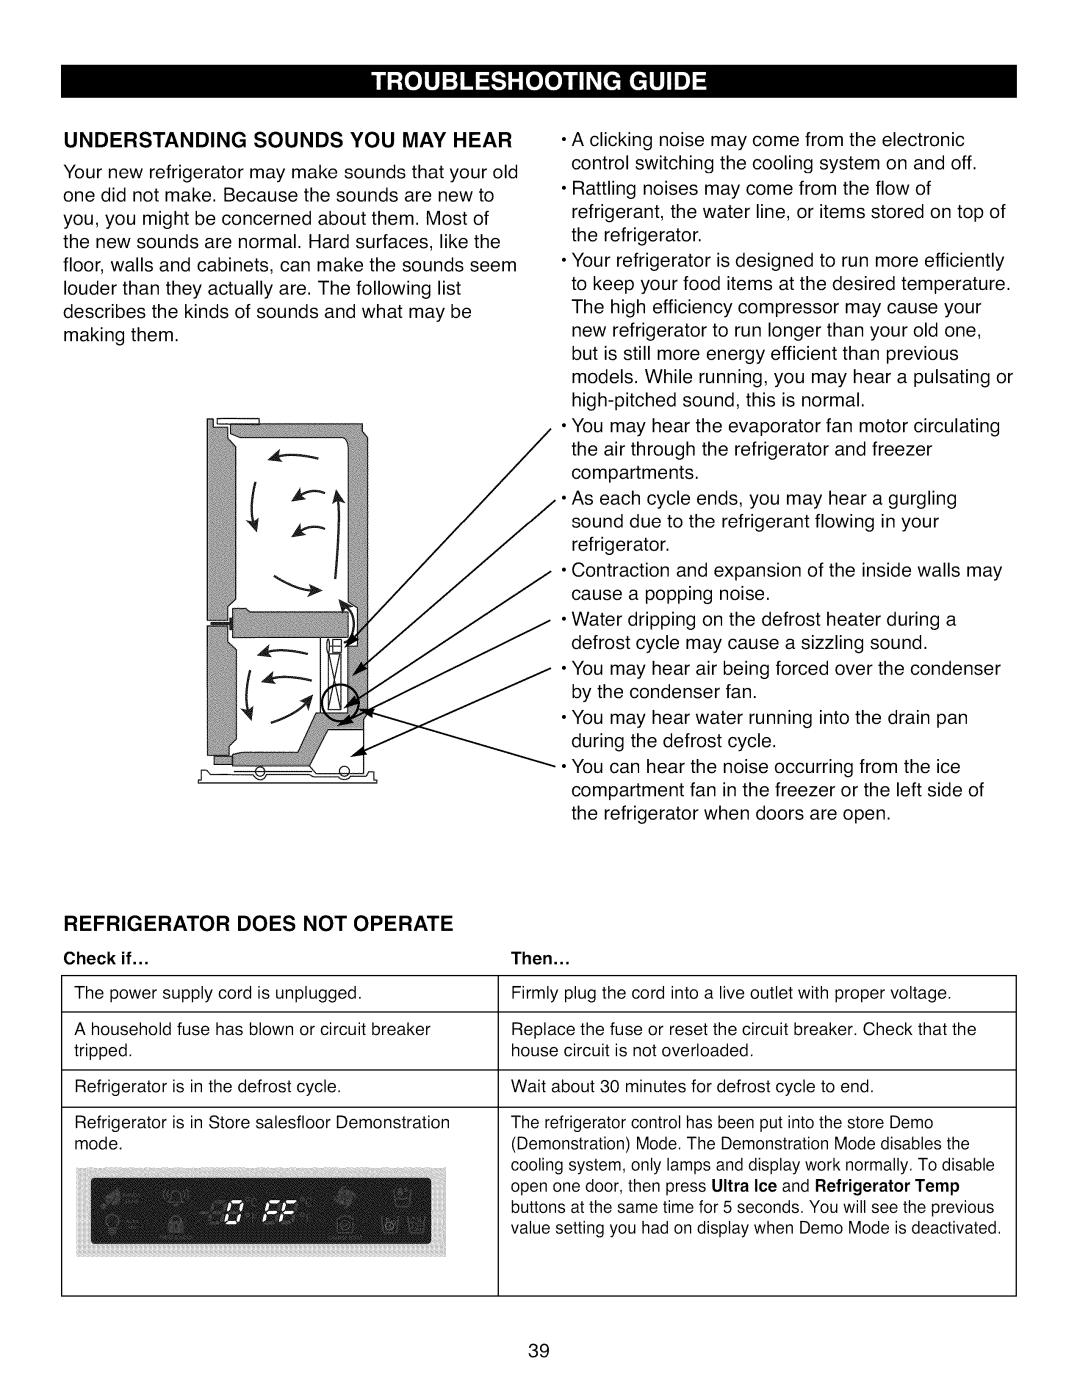 Kenmore 795.7105 manual Understanding Sounds You May Hear, REFRIGERATOR DOES NOT OPERATE Check if, Then 